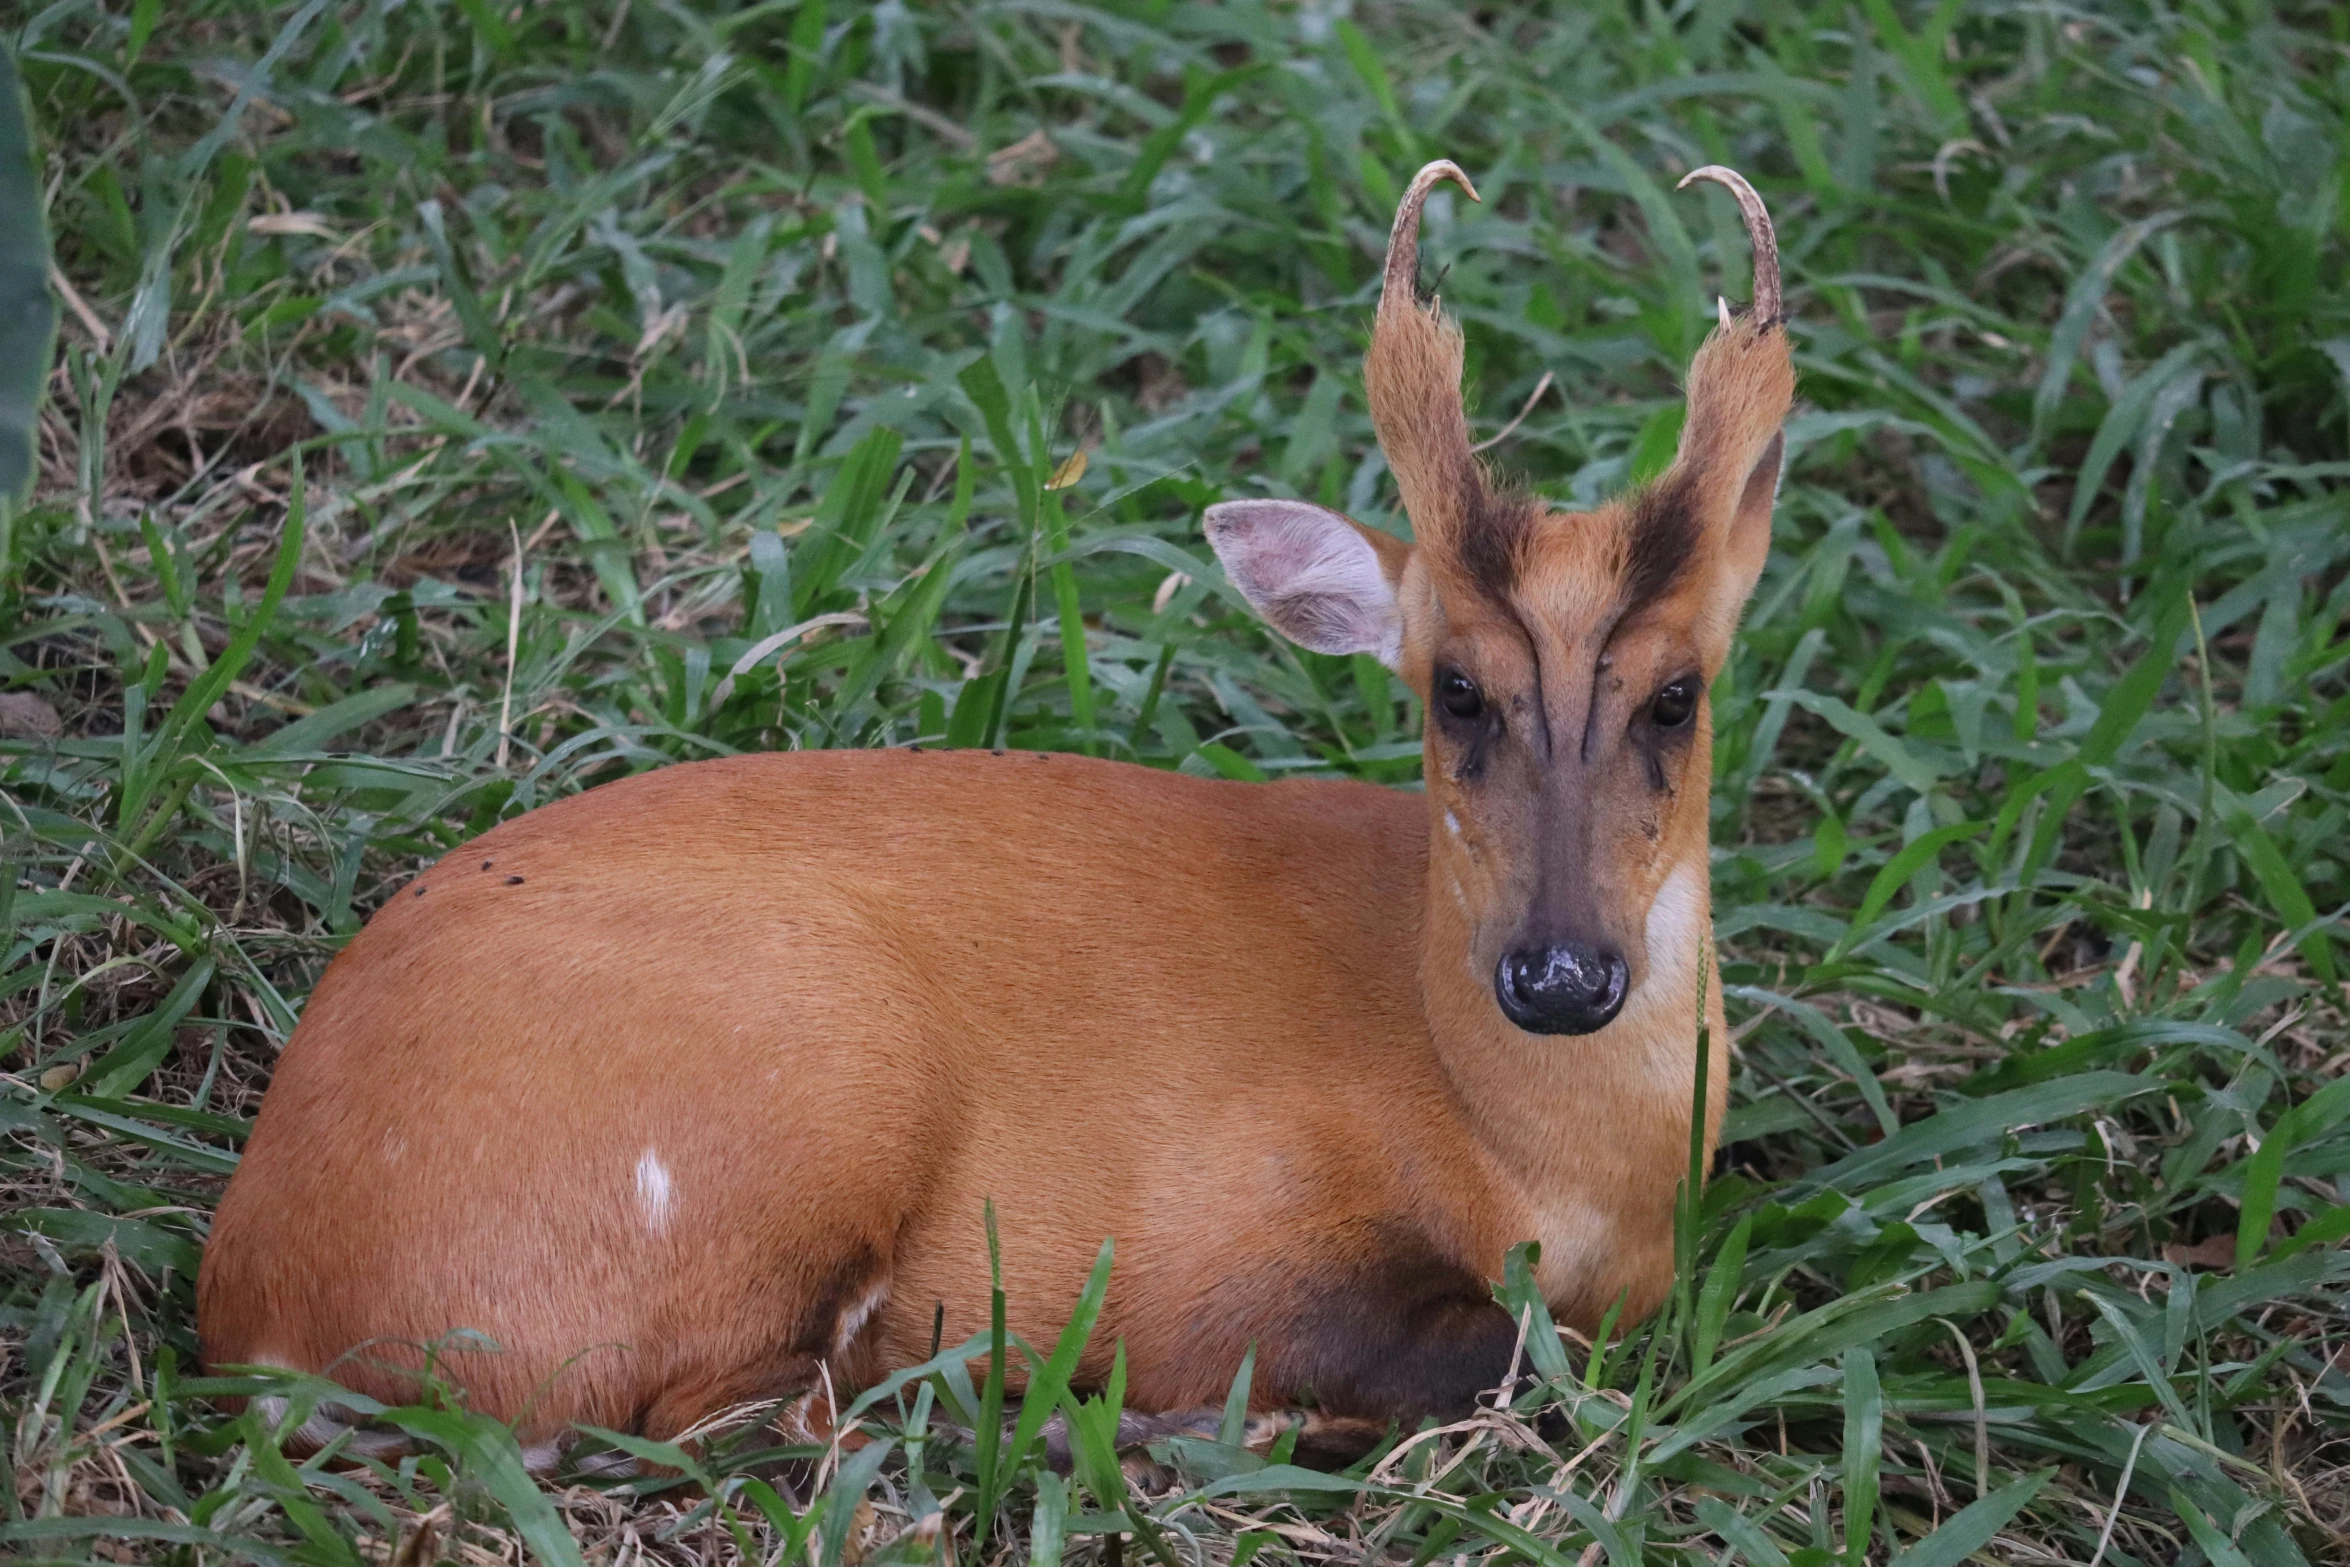 a deer laying down in a grassy field